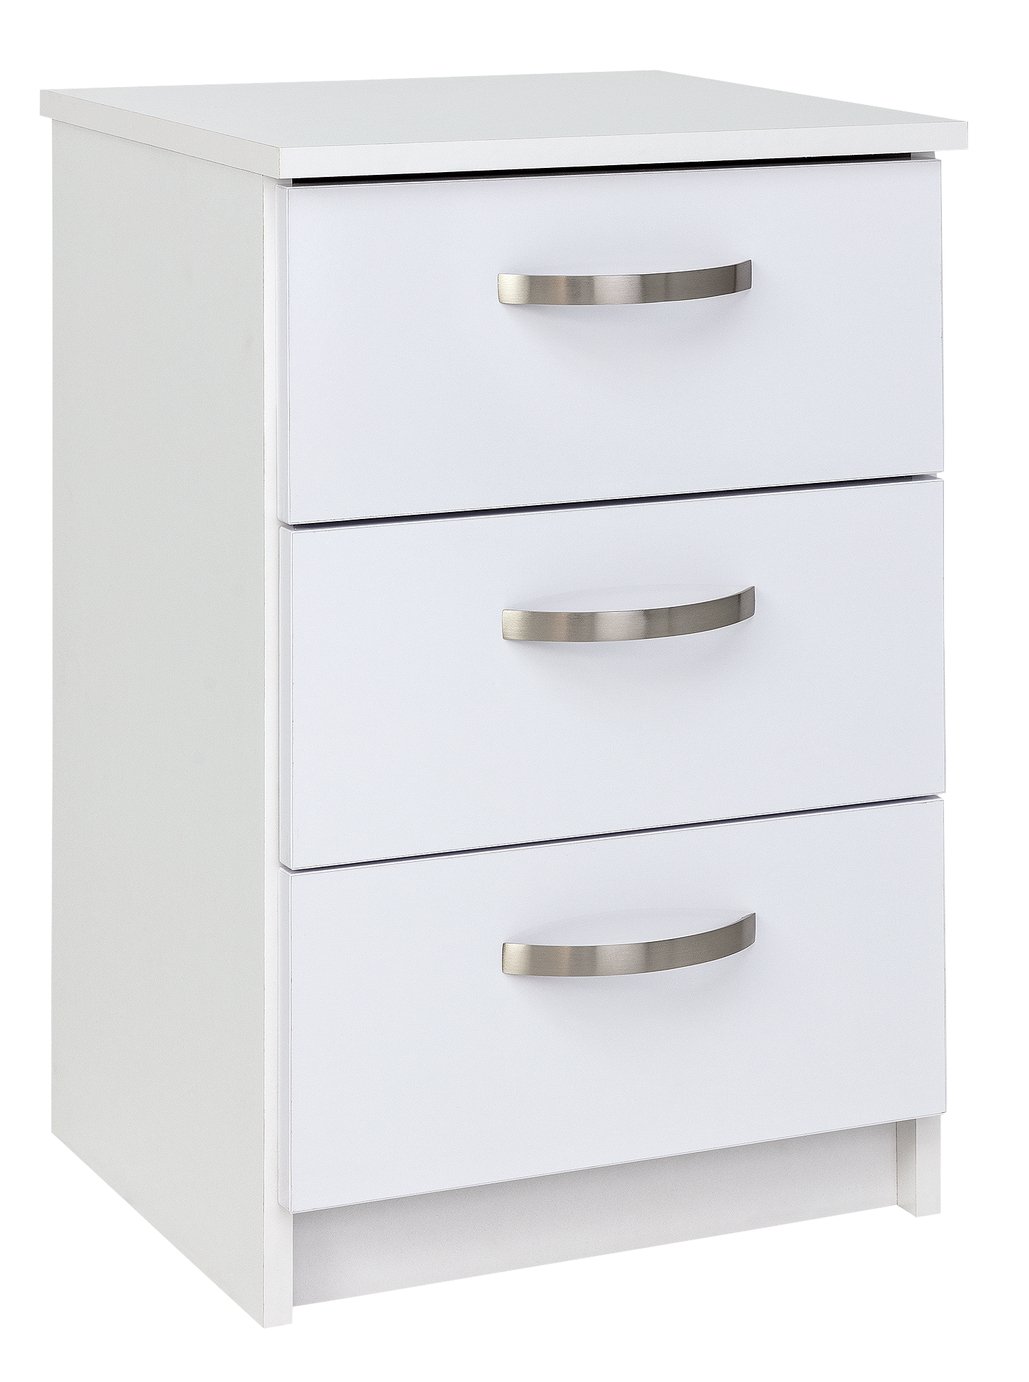 Argos Home Cheval Gloss 3 Drawer Bedside Table - White